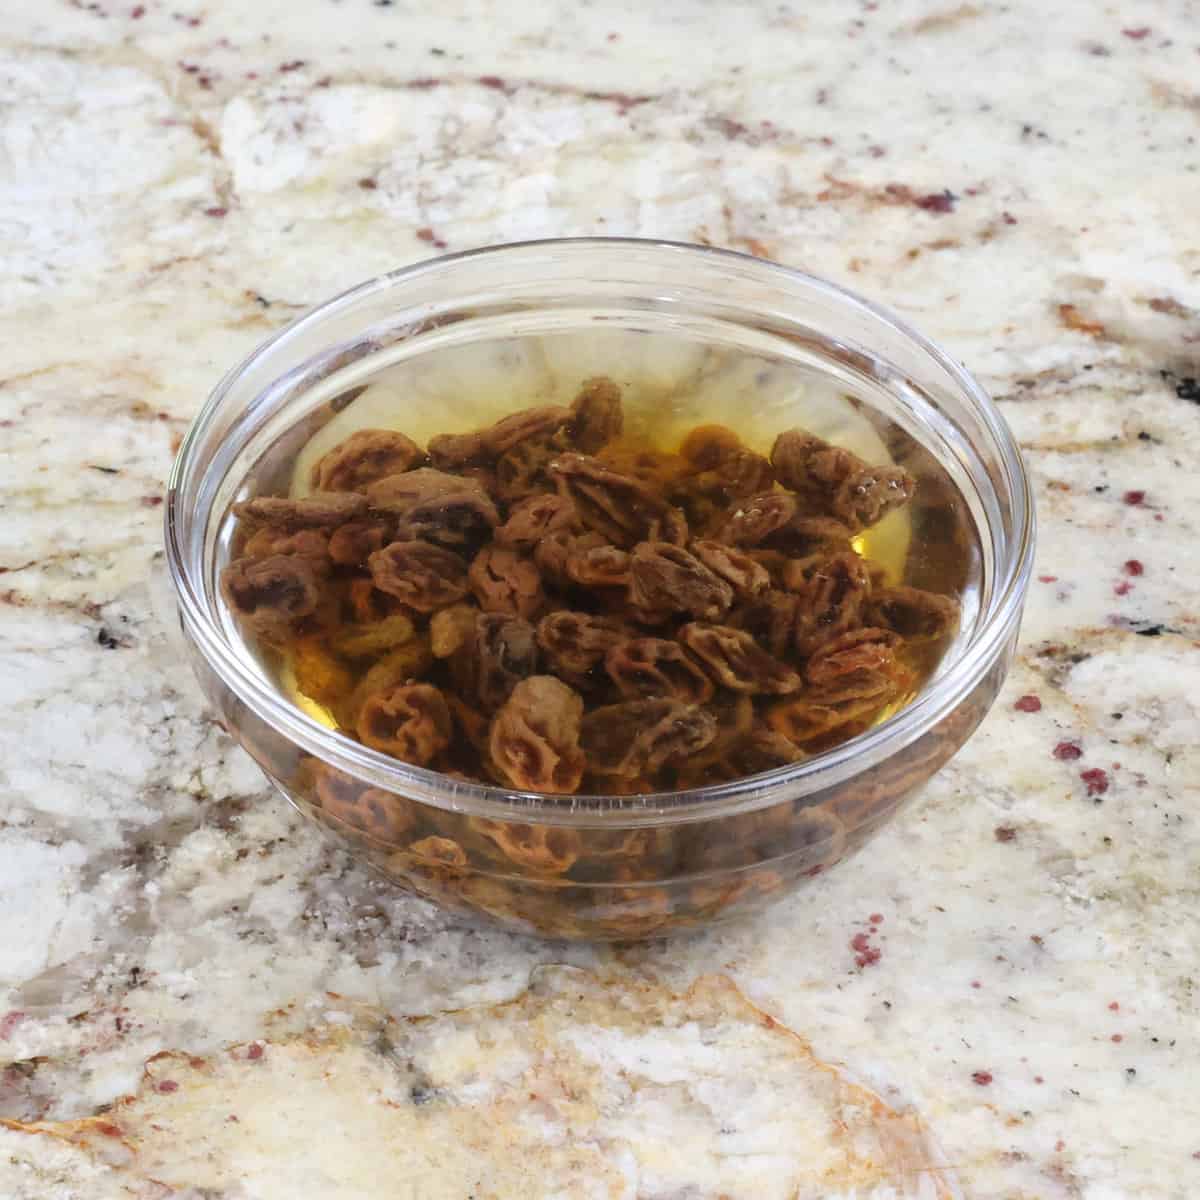 raisins soaking in hot water on a kitchen counter.